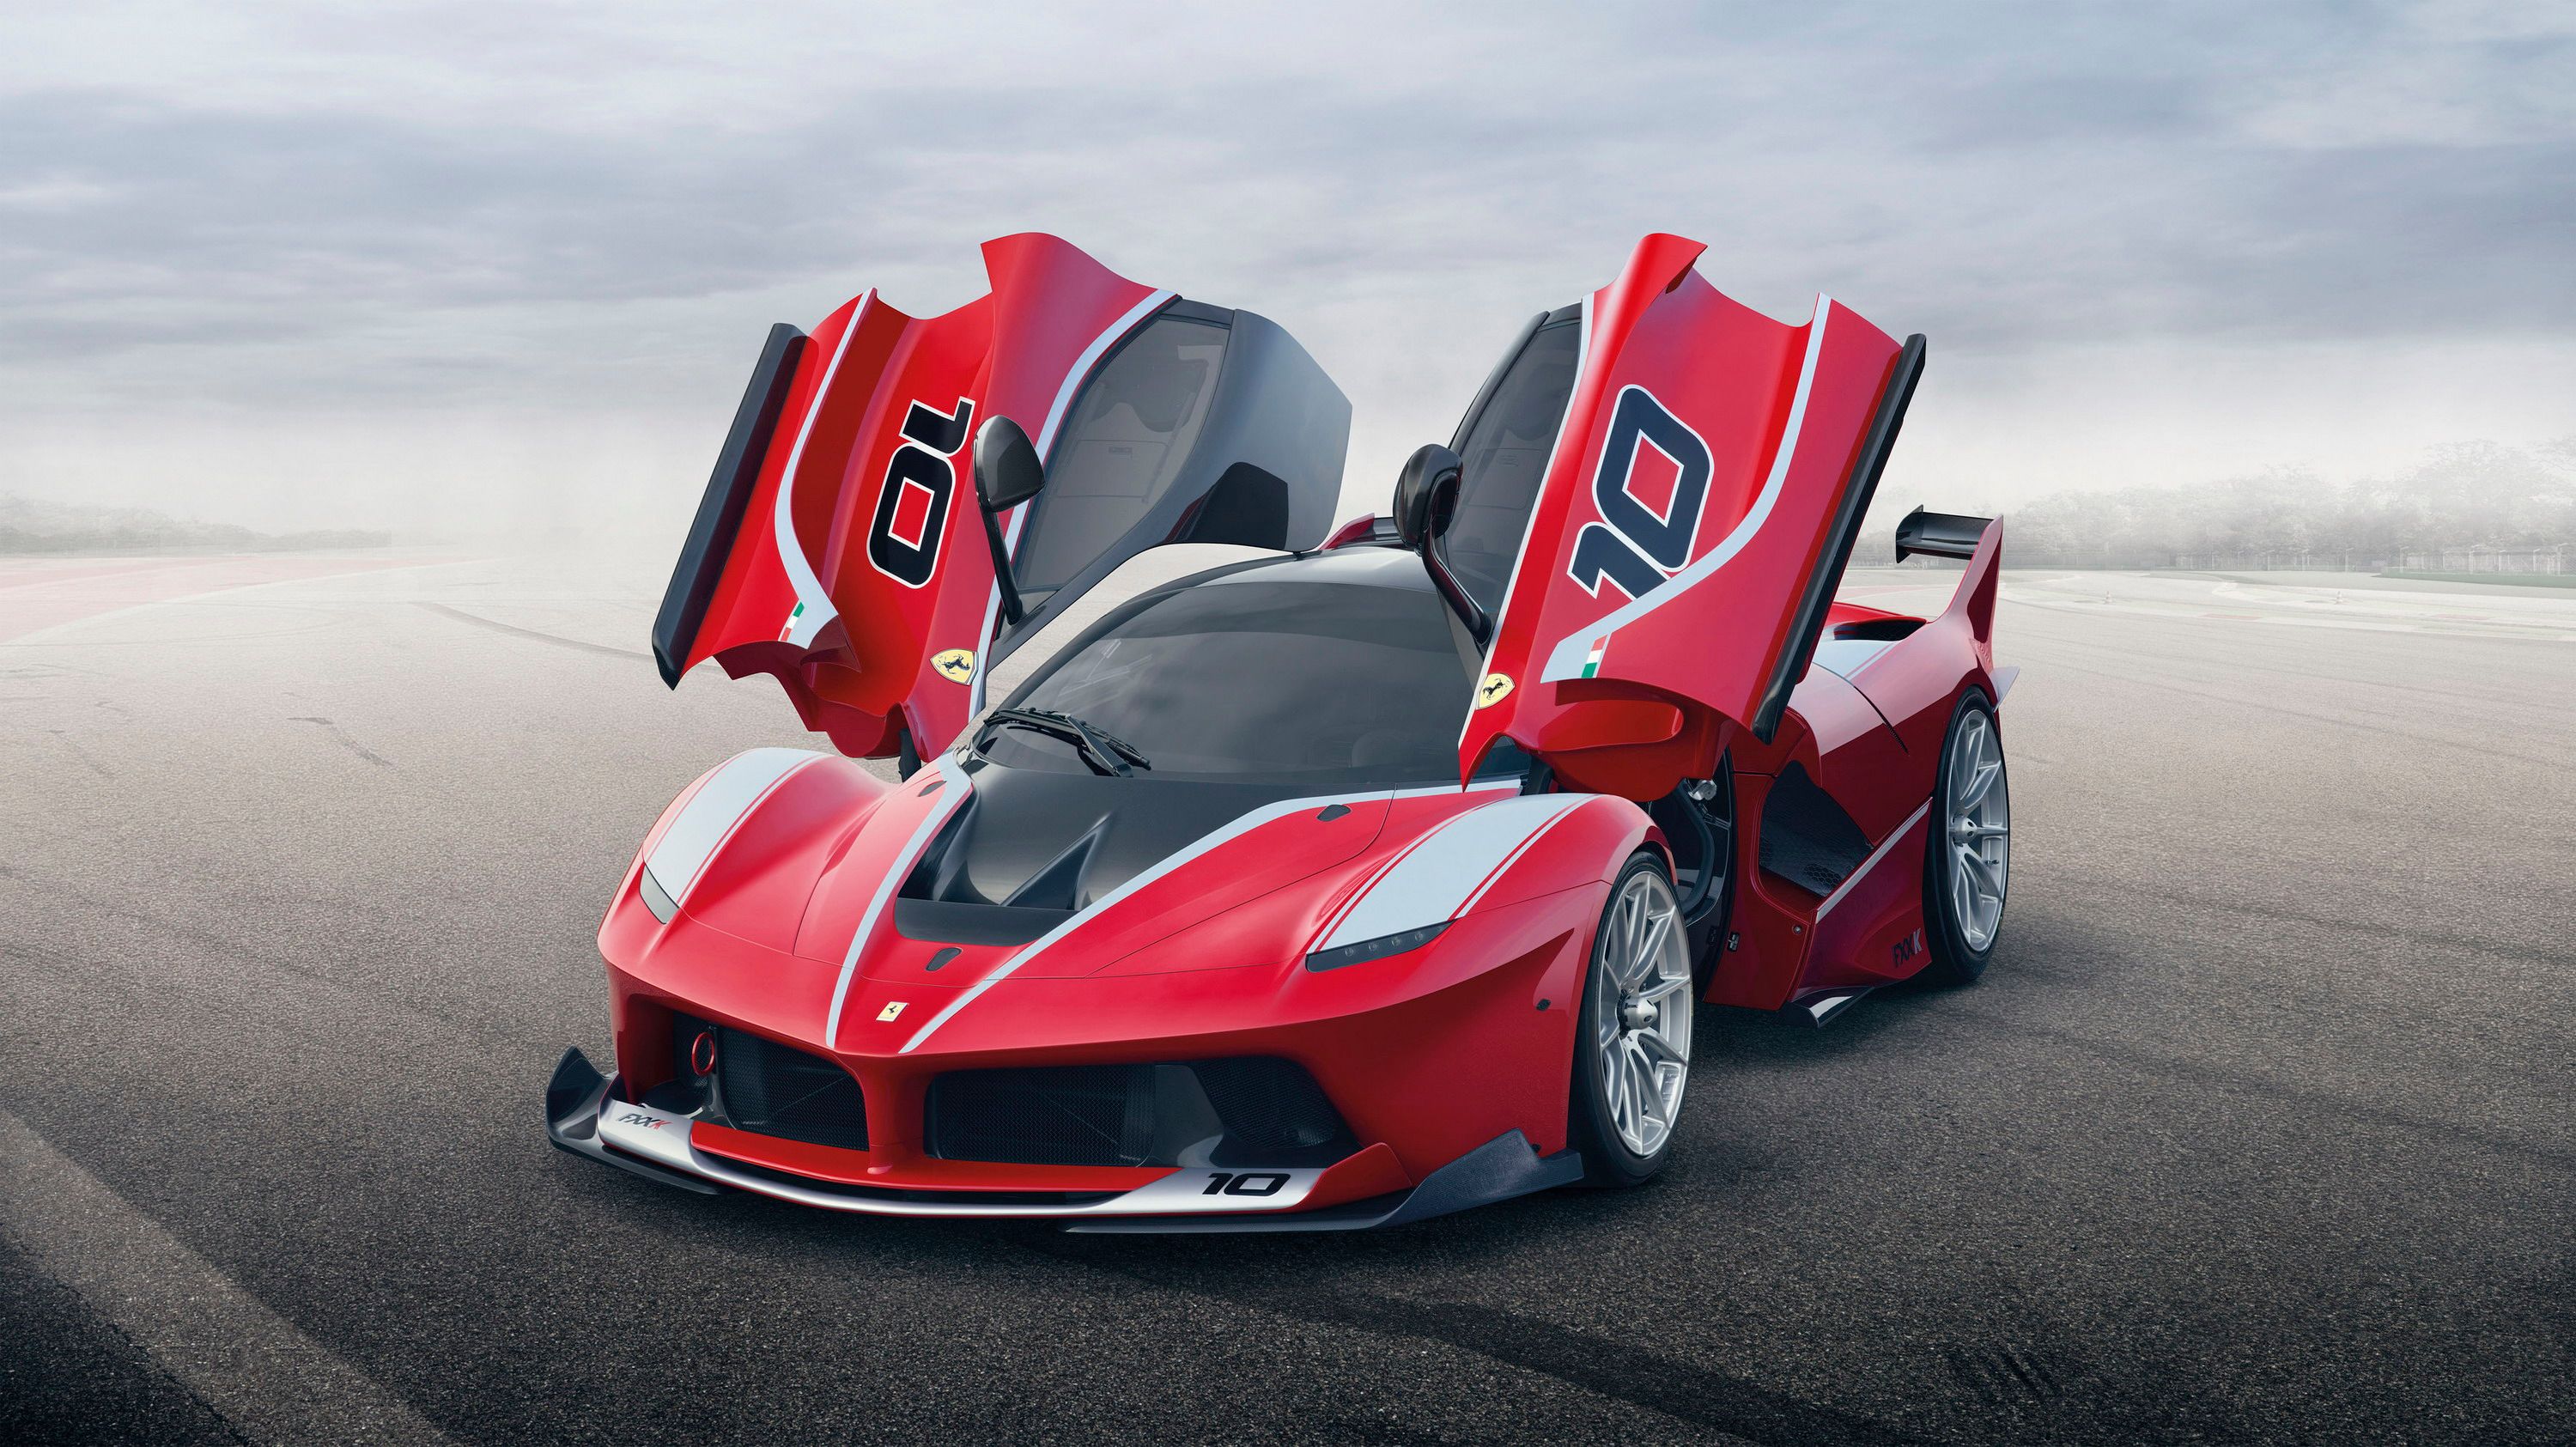  The Ferrari FXX K (AKA the track-only LaFerrari) has finally made its debut. Check out all of its hybrid supercar awesomeness at TopSpeed.com!